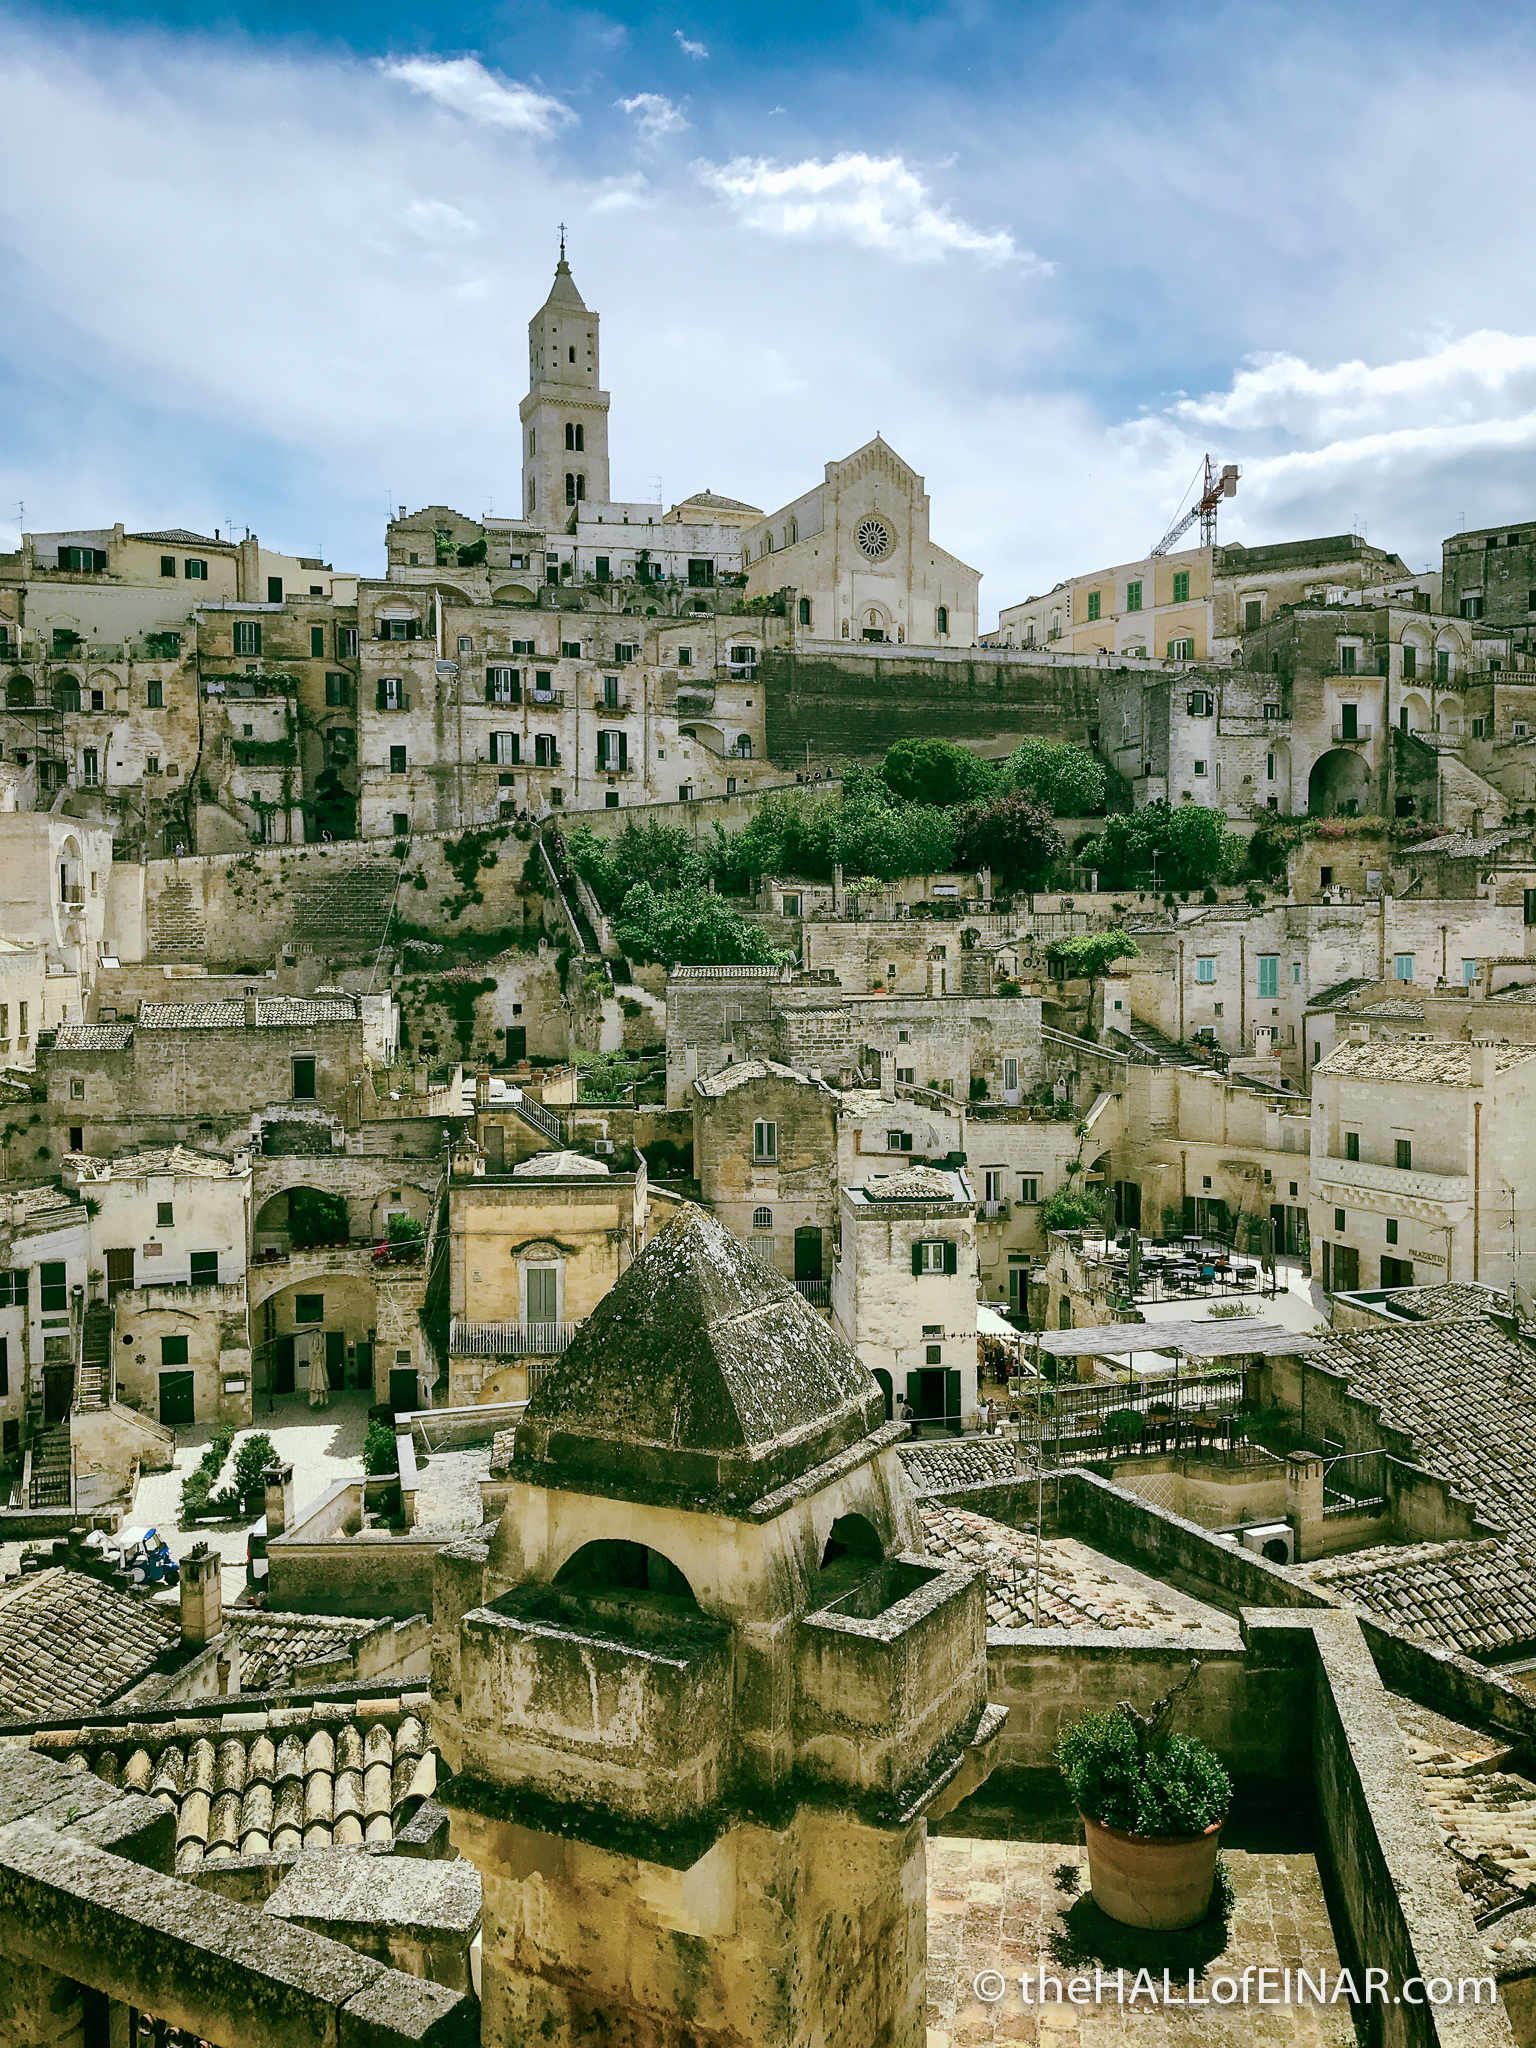 Matera - The Hall of Einar - photograph (c) David Bailey (not the)